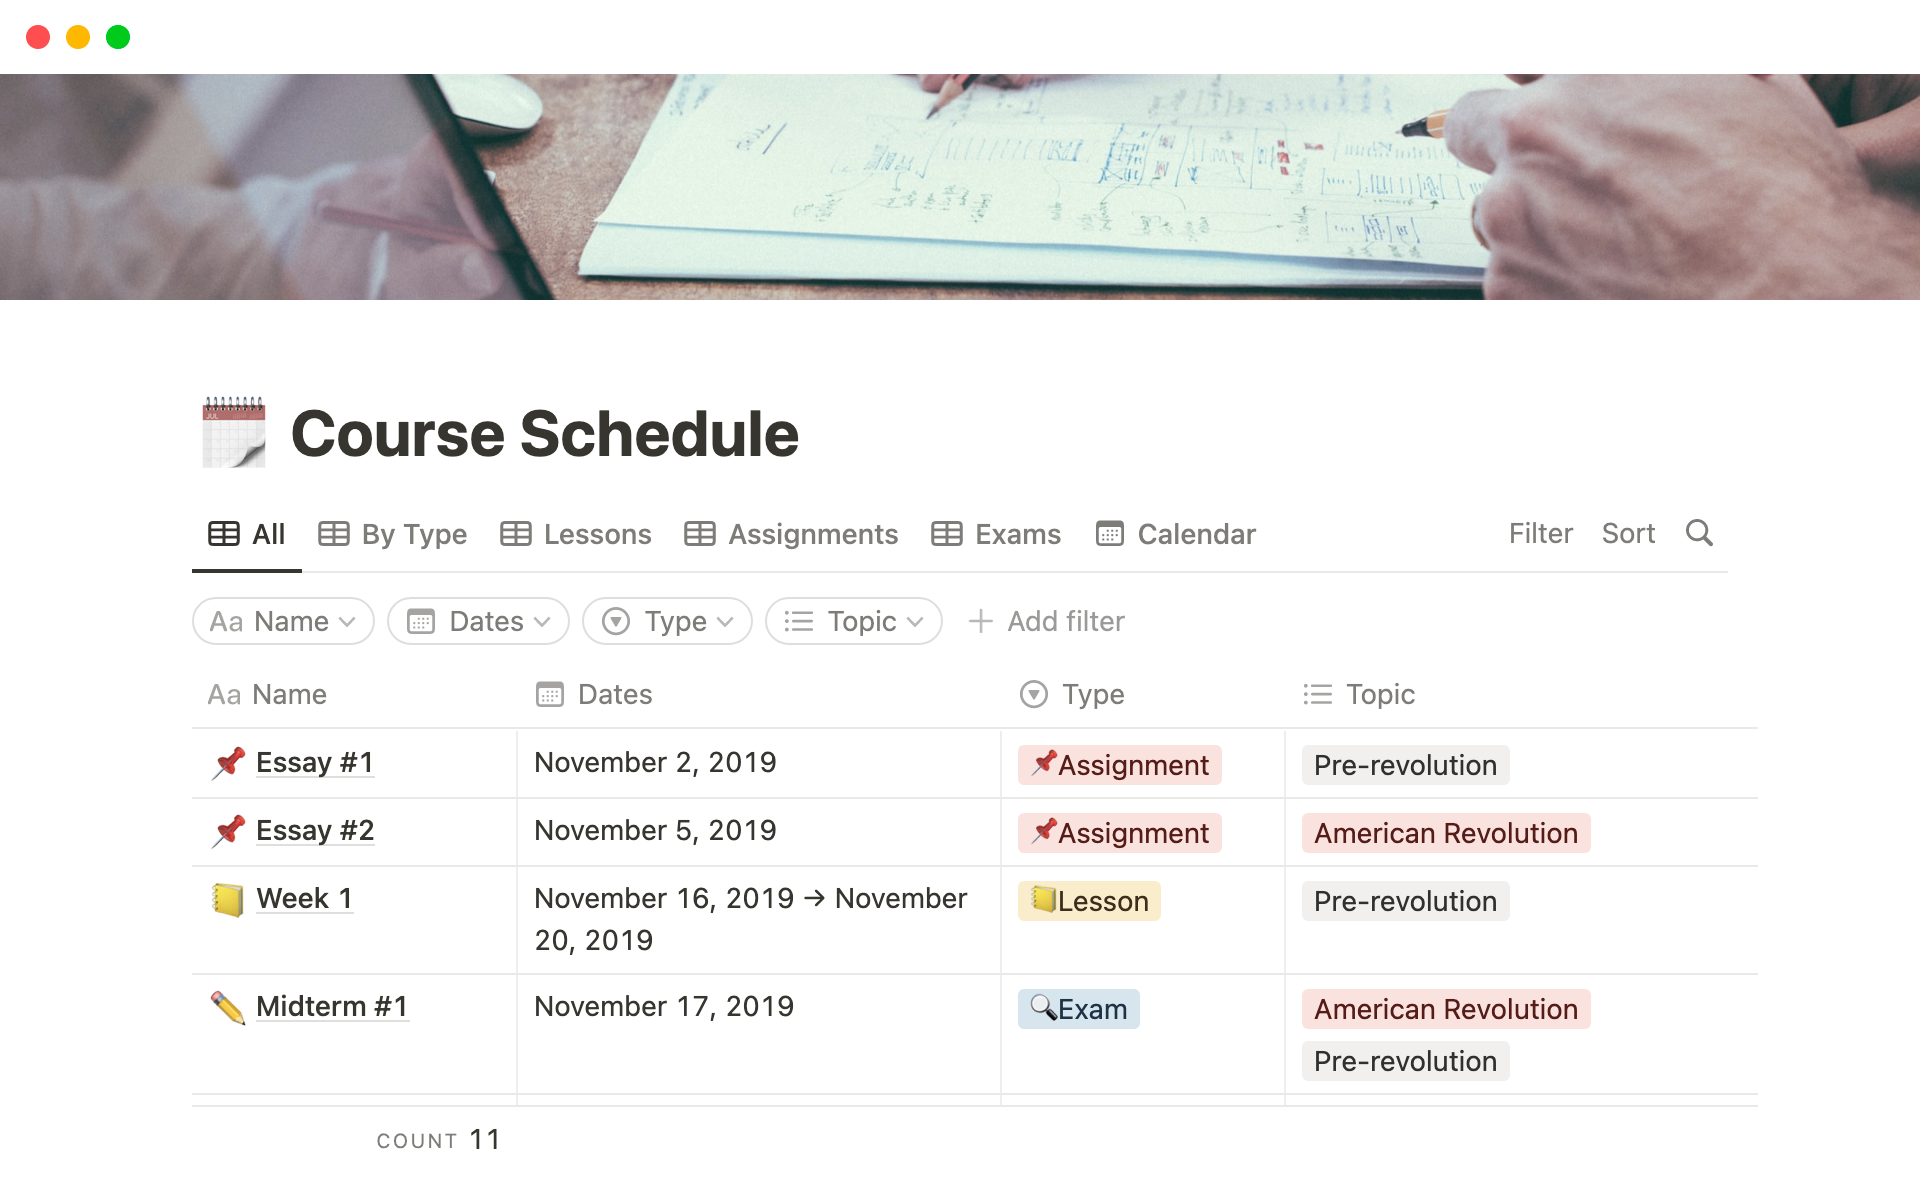 Our Course Schedule Notion Template can help you manage your coursework with ease and efficiency